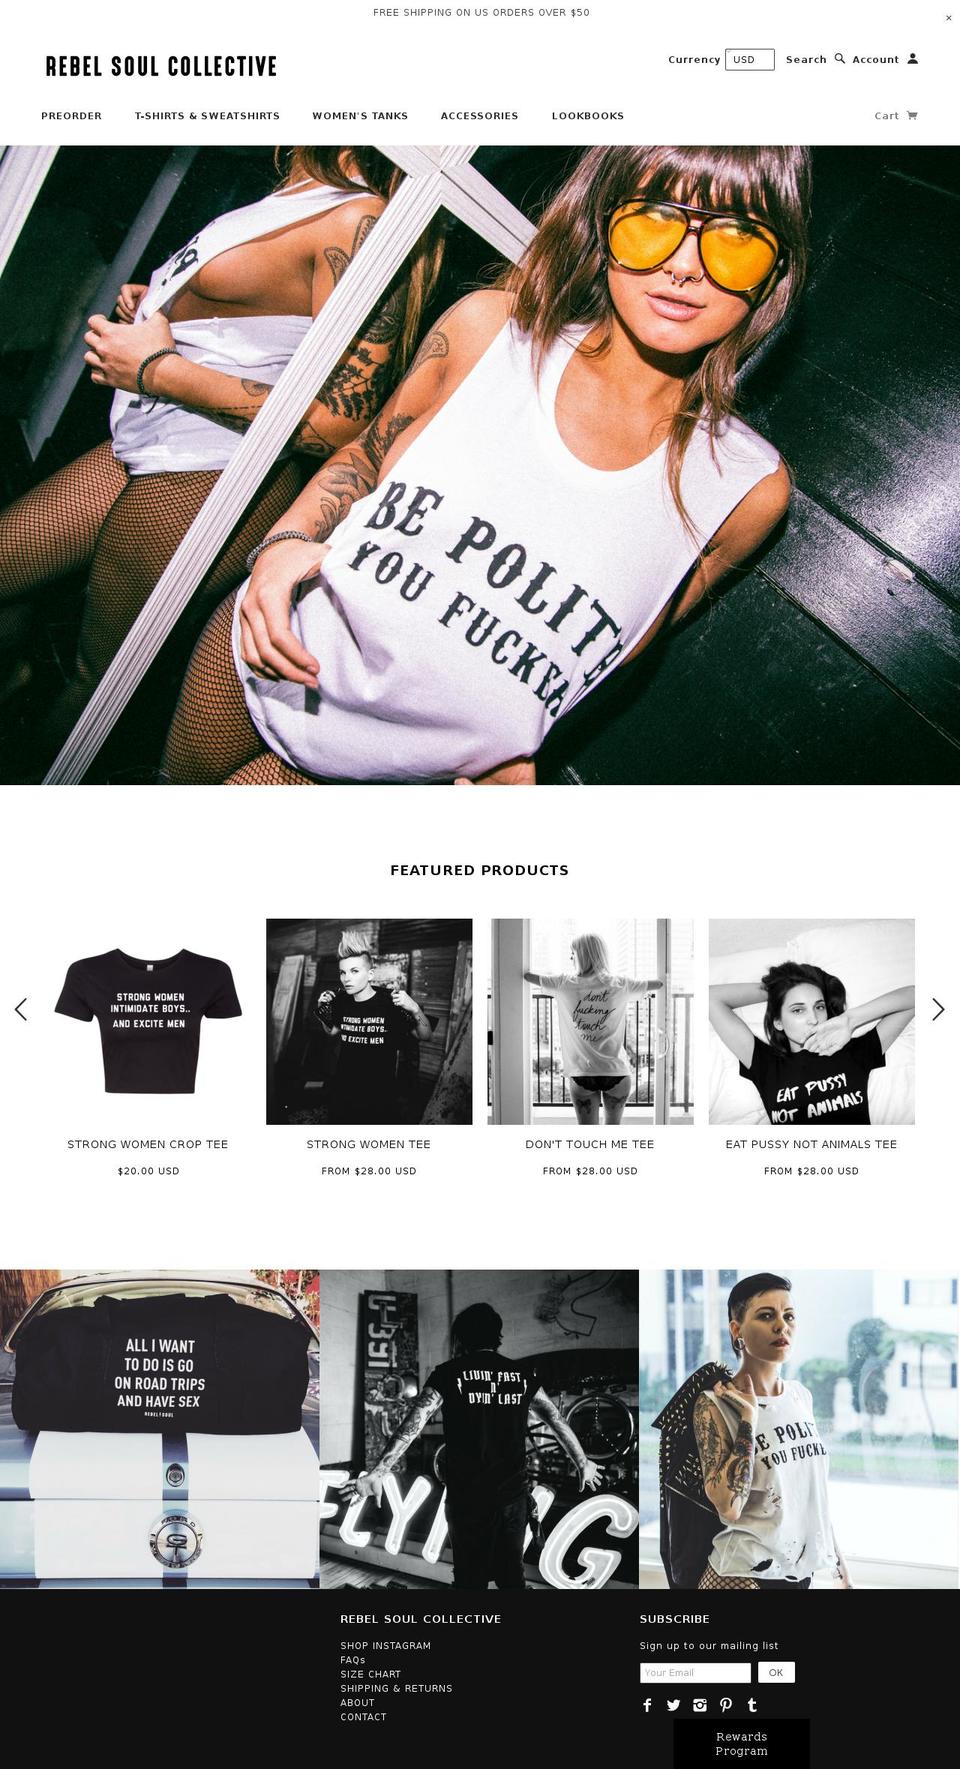 Influence Shopify theme site example rebelsoulcollective.net